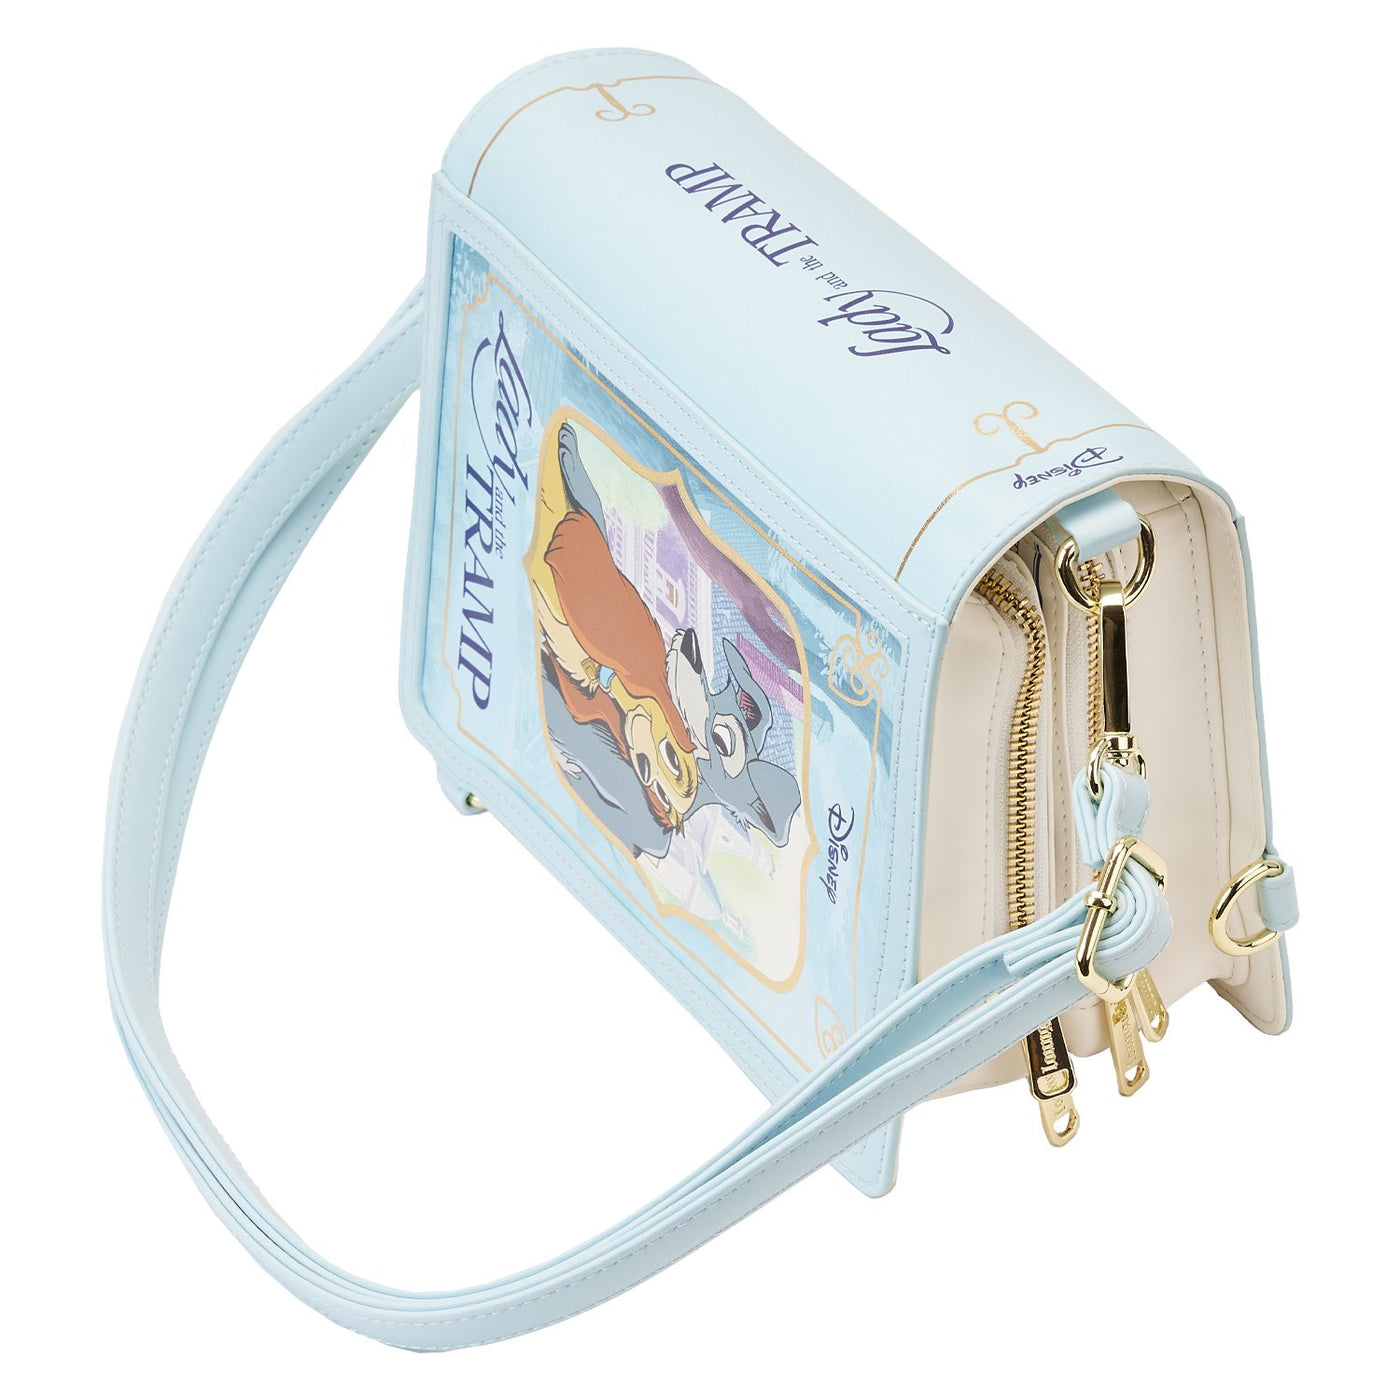 671803448377 - Loungefly Disney Lady and the Tramp Classic Book Convertible Crossbody - Alternate Top View